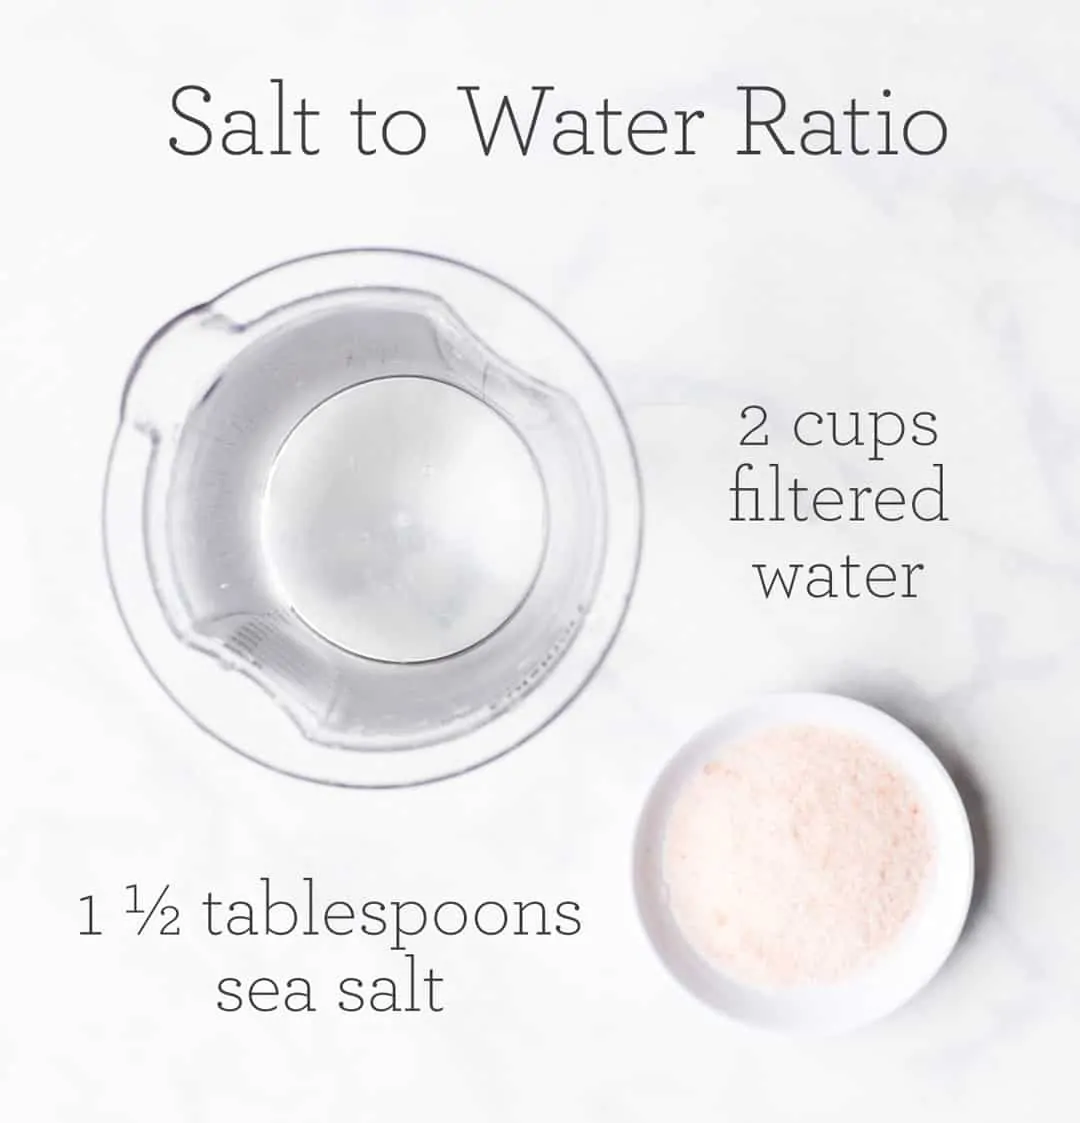 Image with text showing ratio of water to salt to make fermented pickles